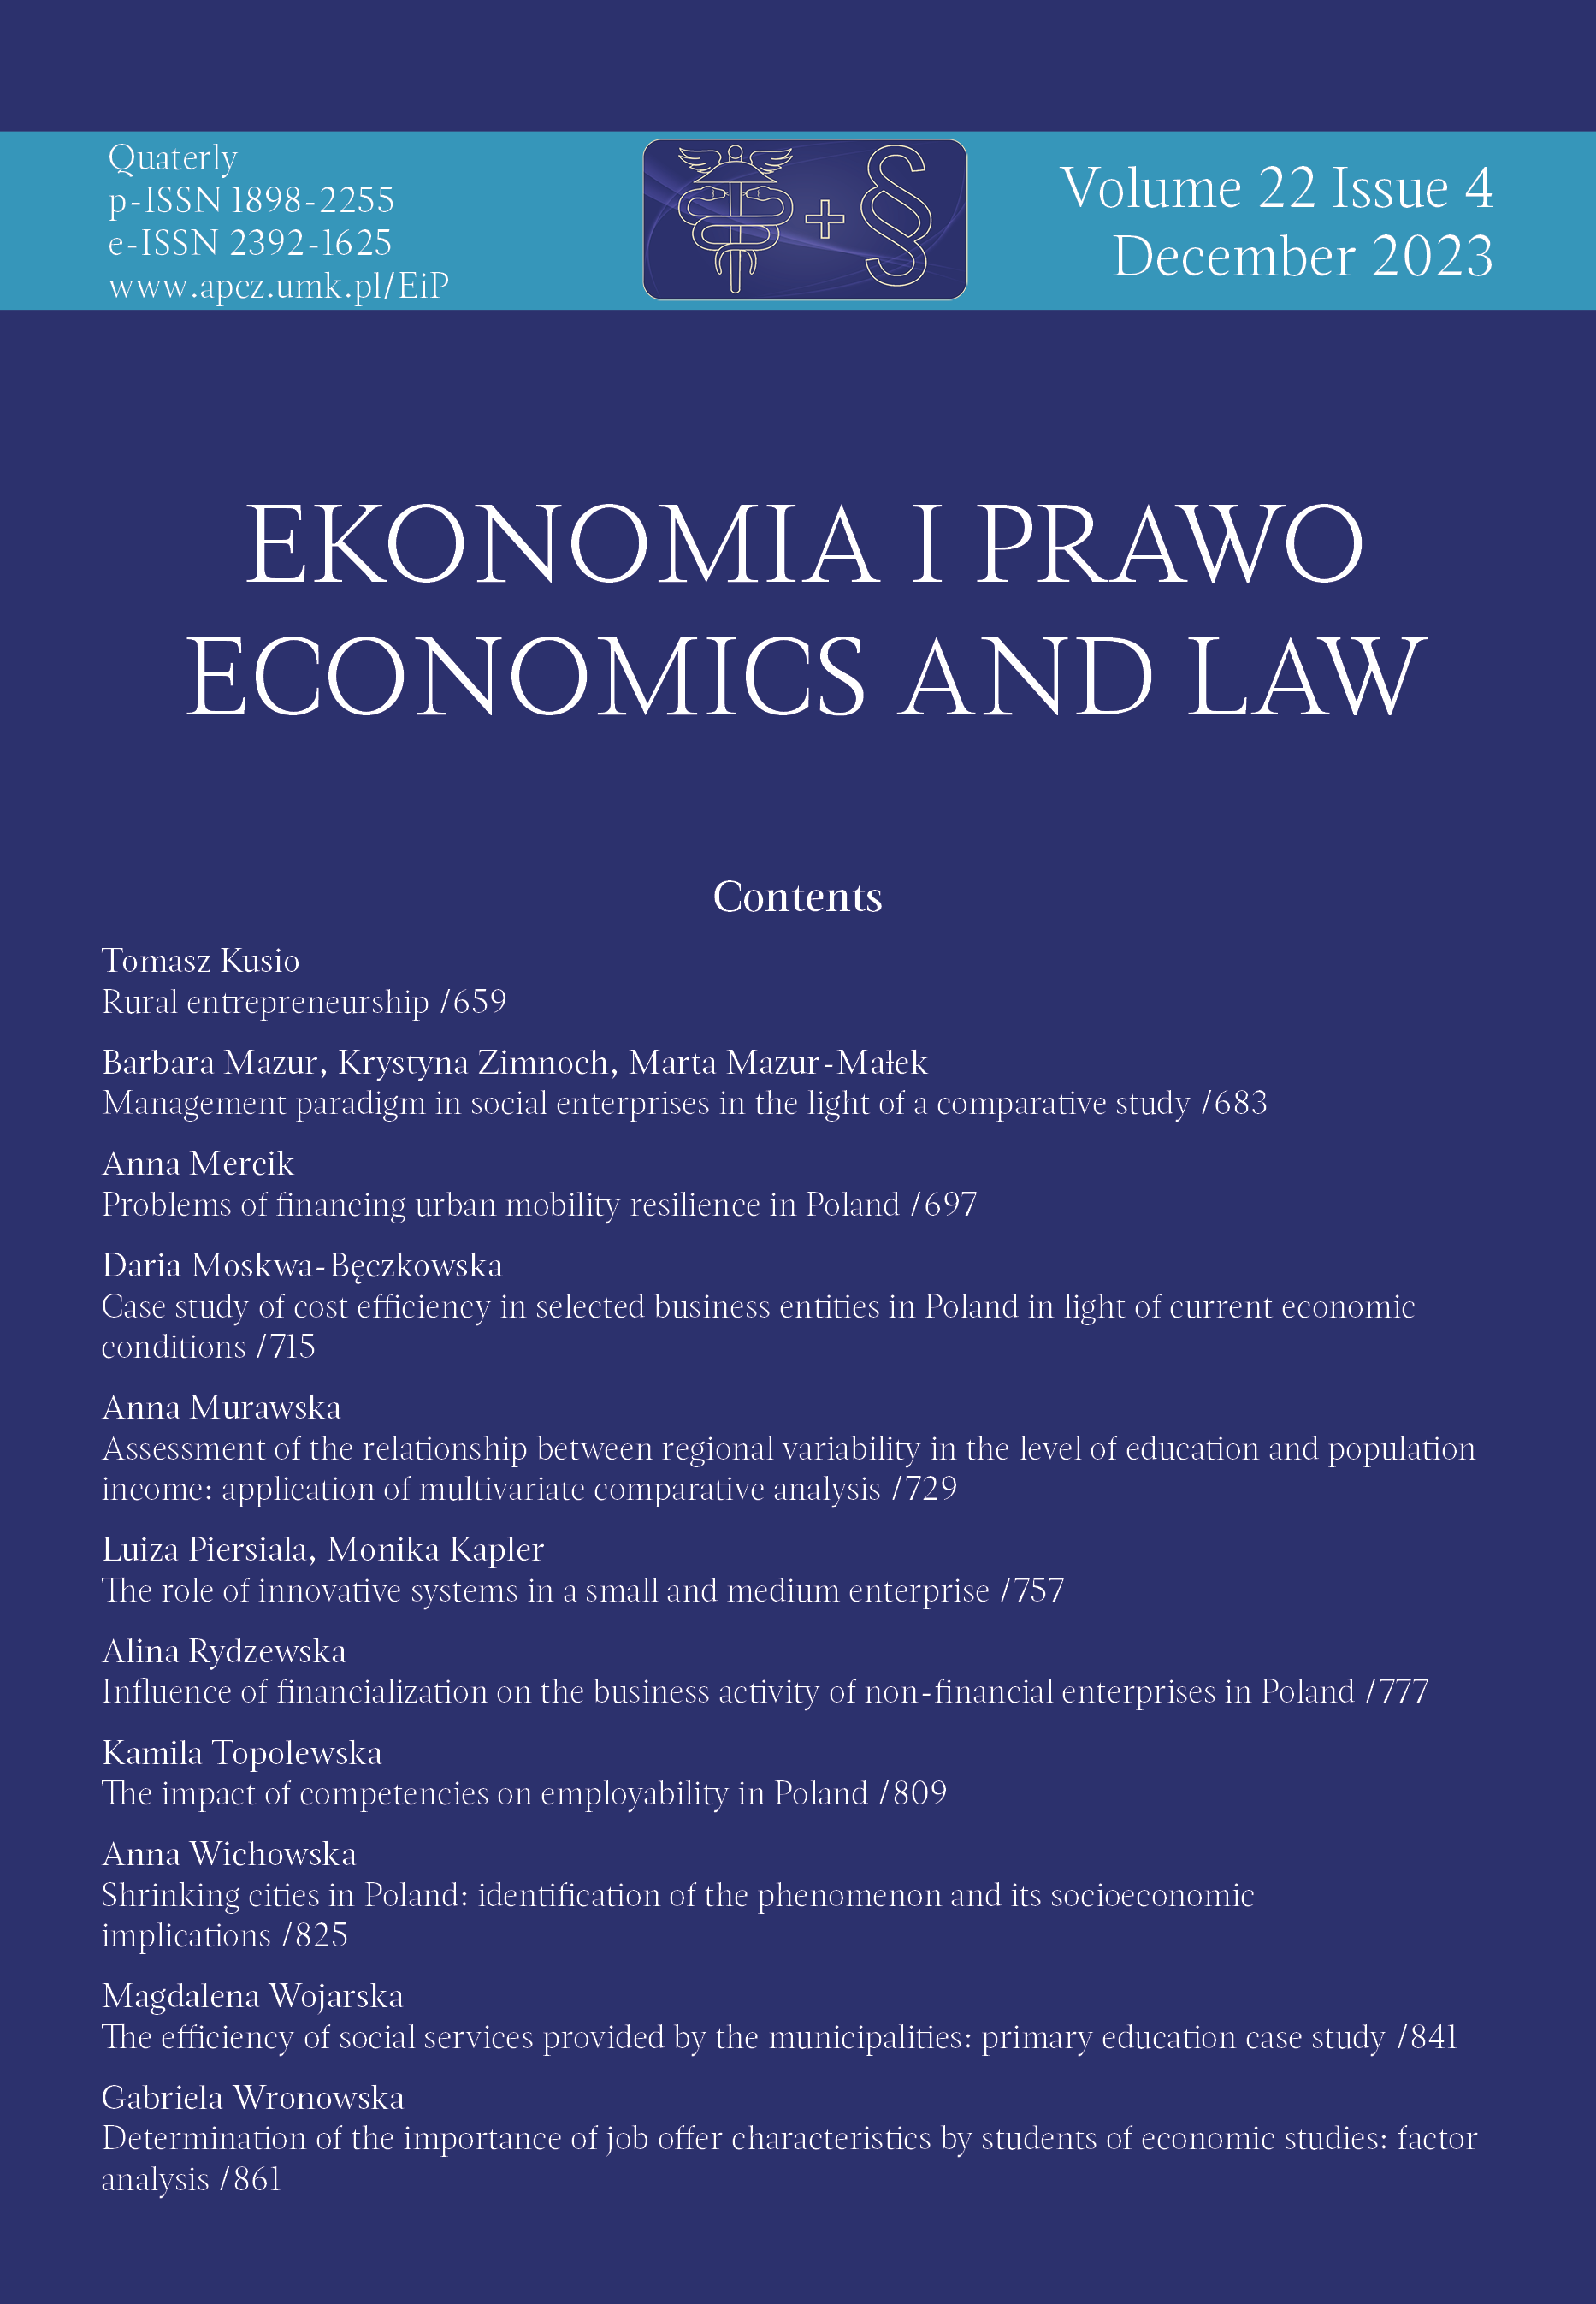 Determination of the importance
of job offer characteristics by students
of economic studies: factor analysis Cover Image